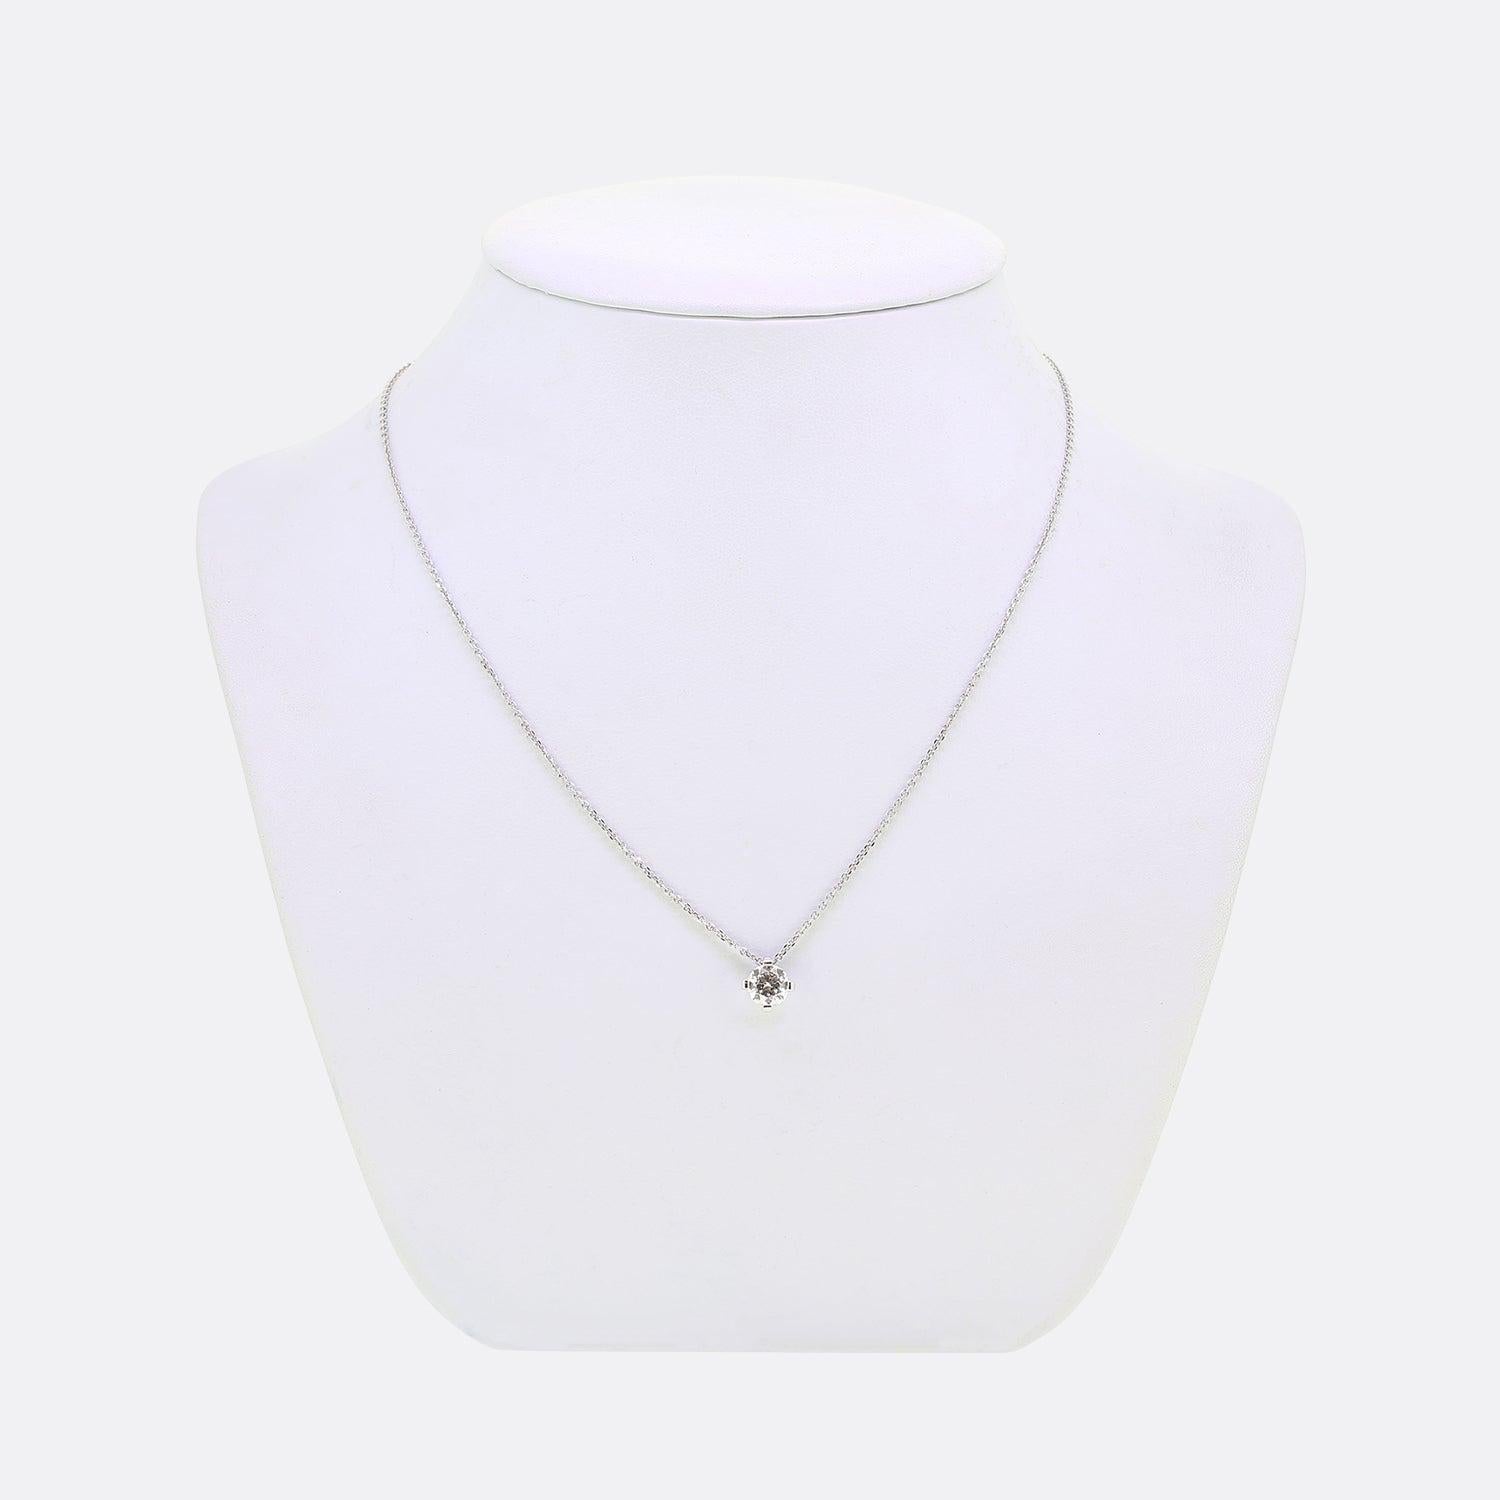 Here we have an 18ct white gold diamond solitaire necklace from the luxury German jewellery designer Wempe. Endless brilliance meets precise, detailed work in this handcrafted Splendora Pure BY KIM pendant. A 1.03ct diamond is held by four